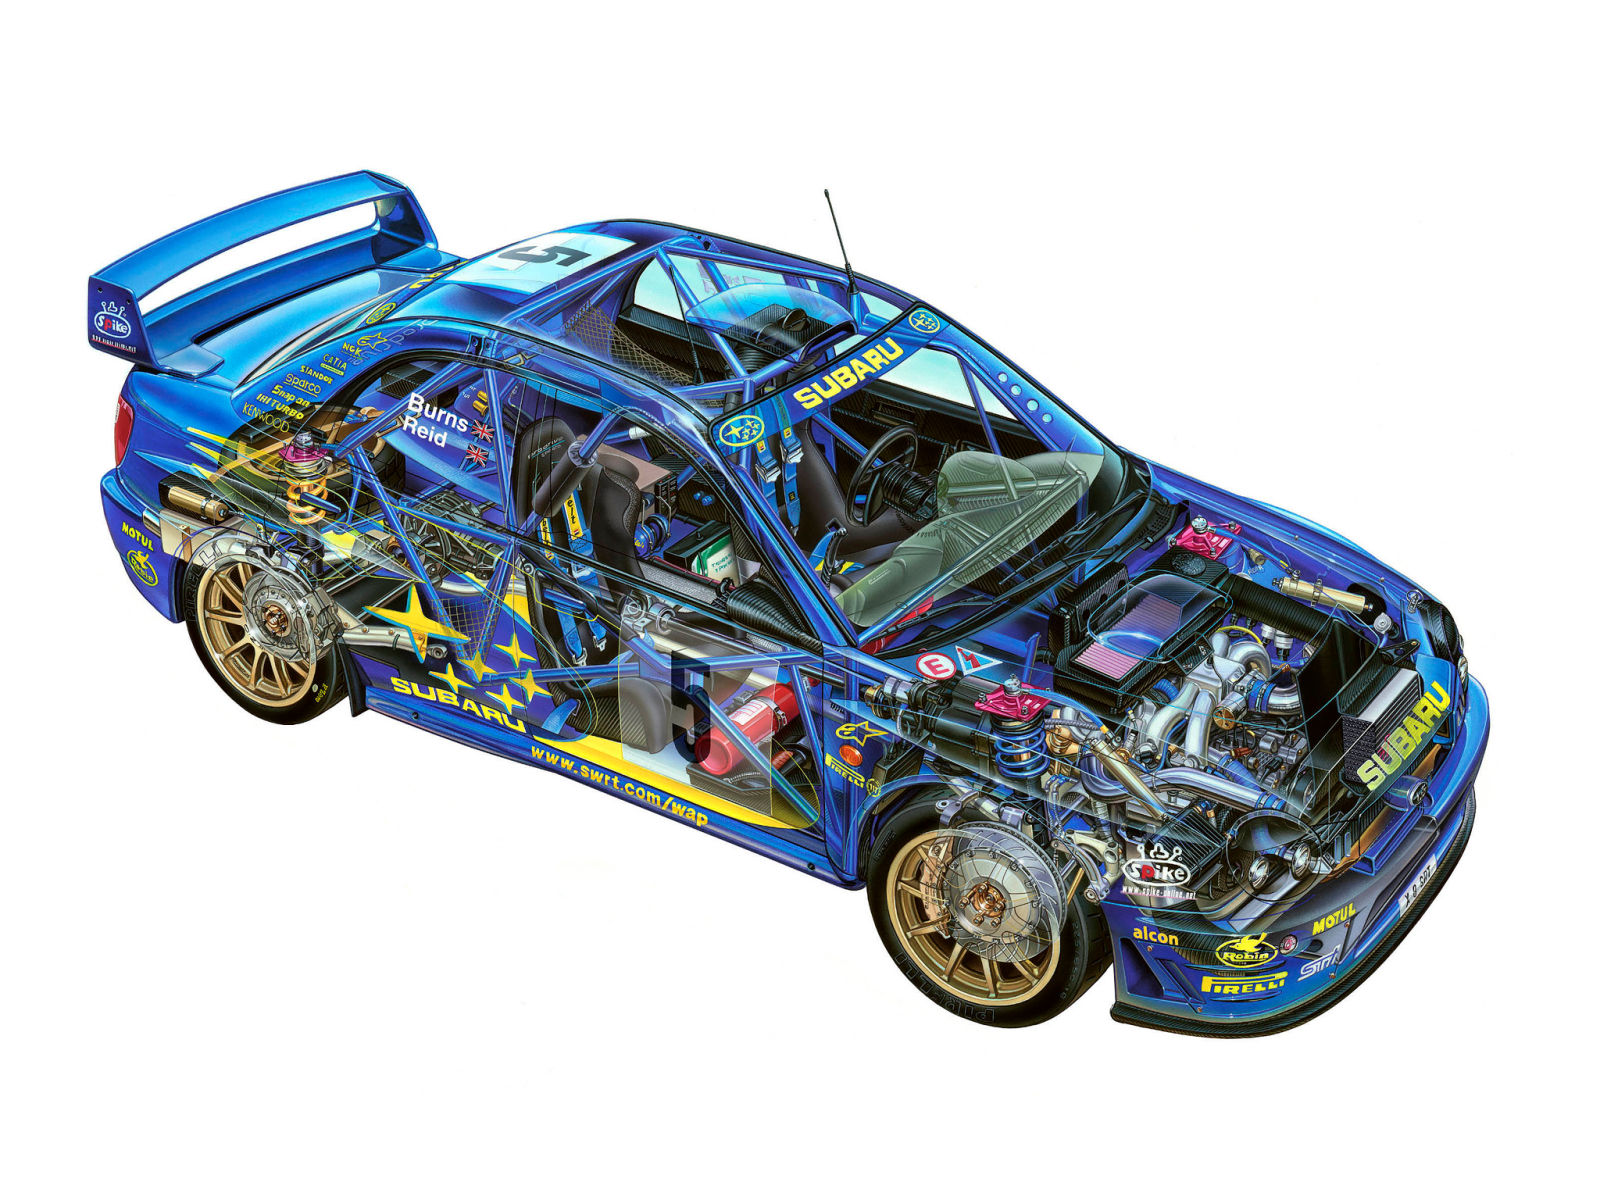 Illustration for article titled Anatomy of a Rally Car